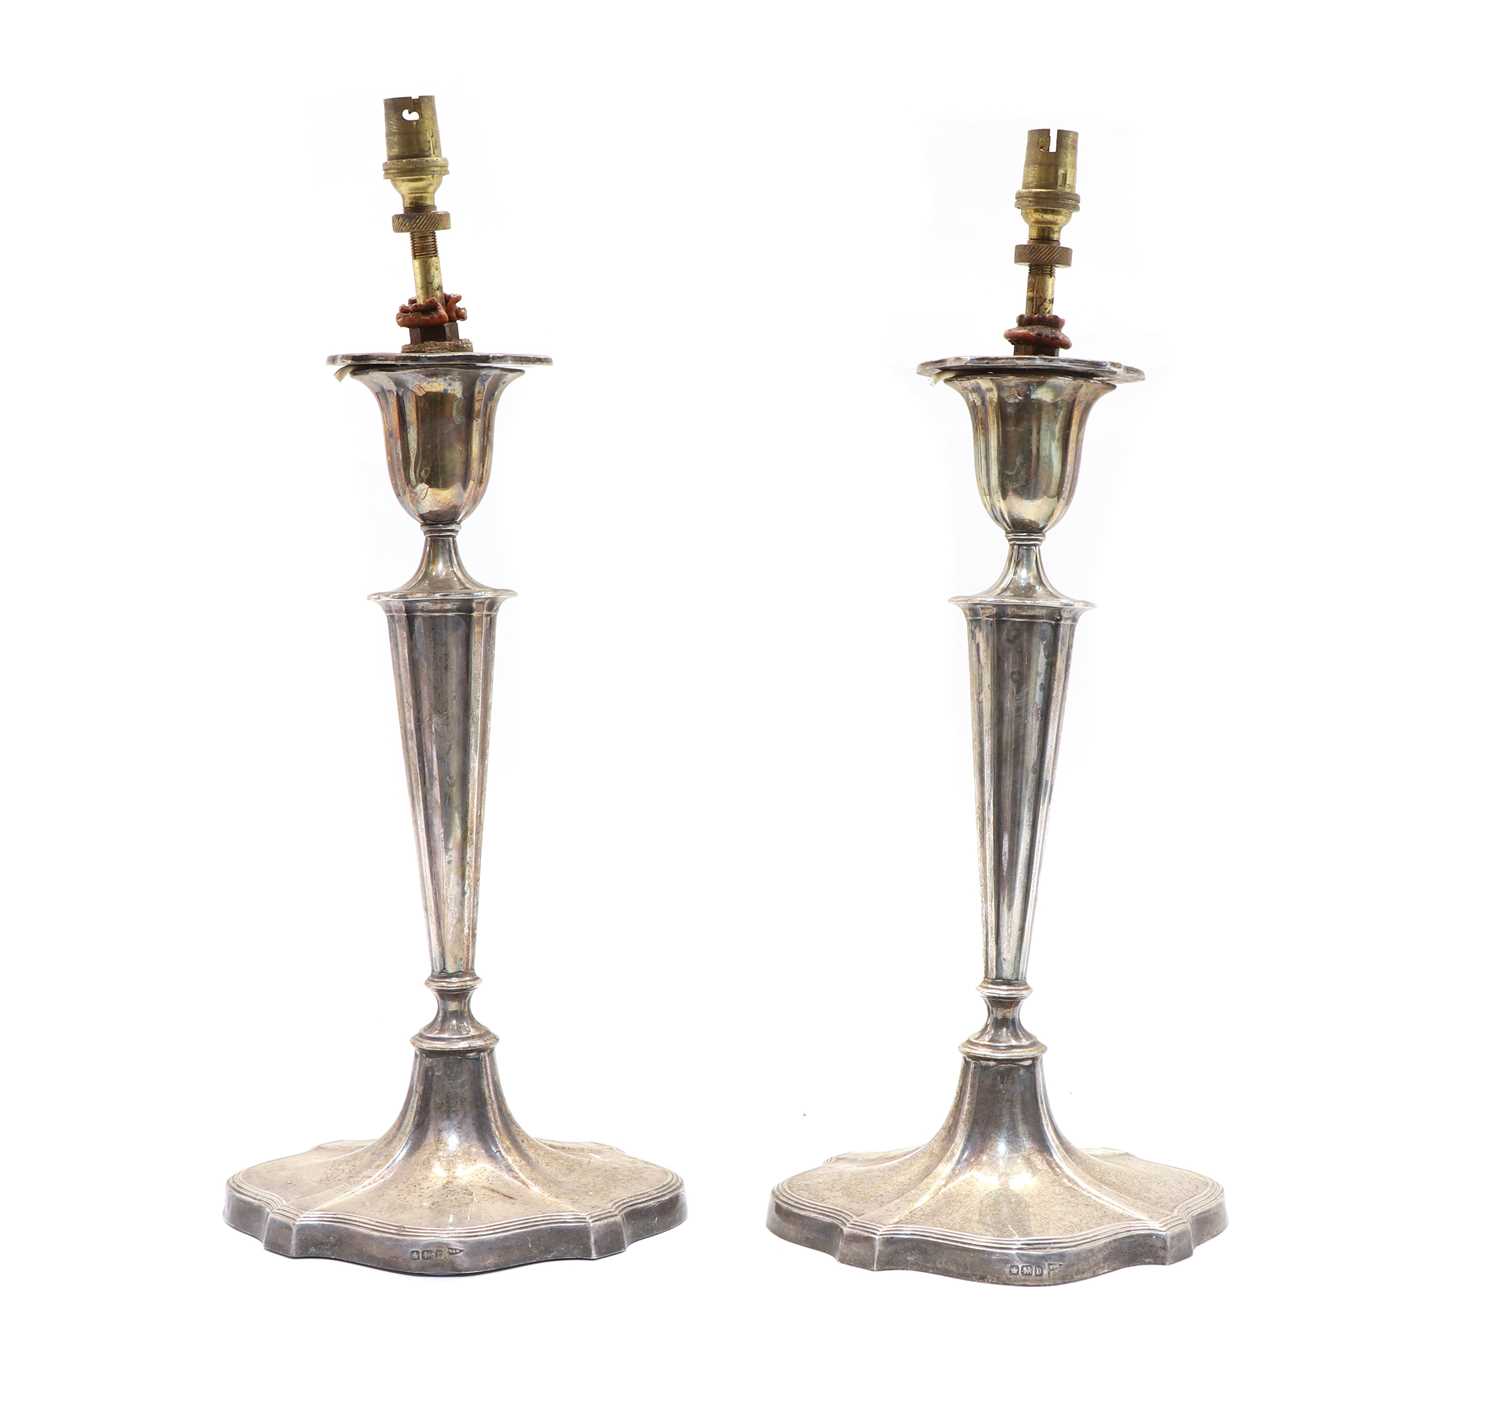 Lot 12 - A pair of early 20th century silver candlesticks